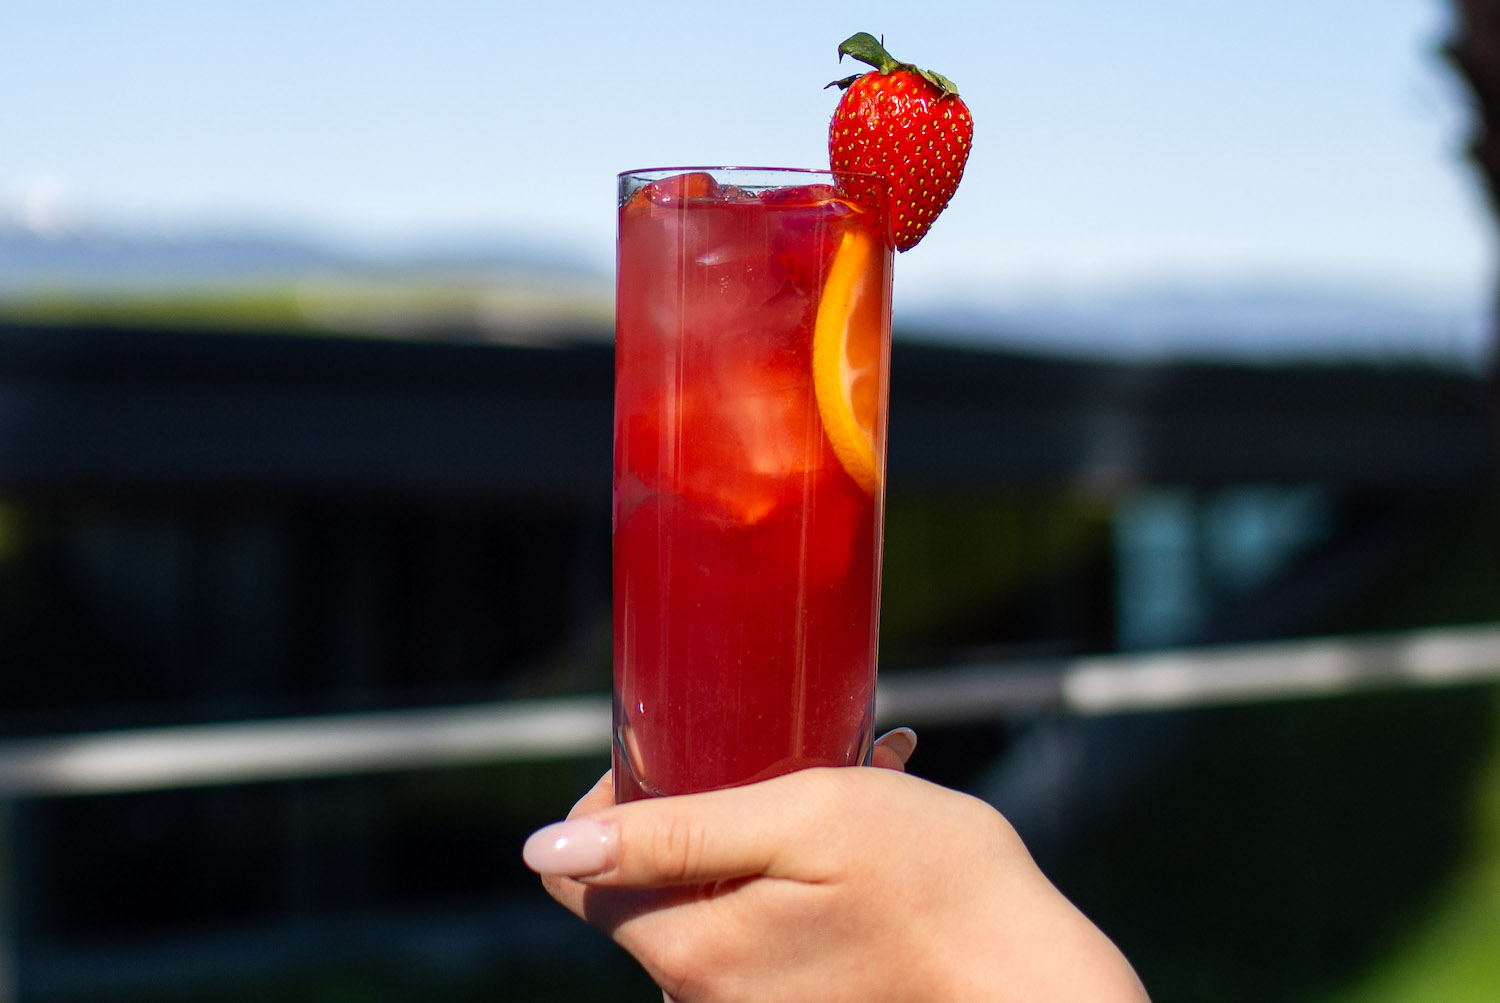 a woman's hand holding a collins glass of rose sangria garnished with a strawberry